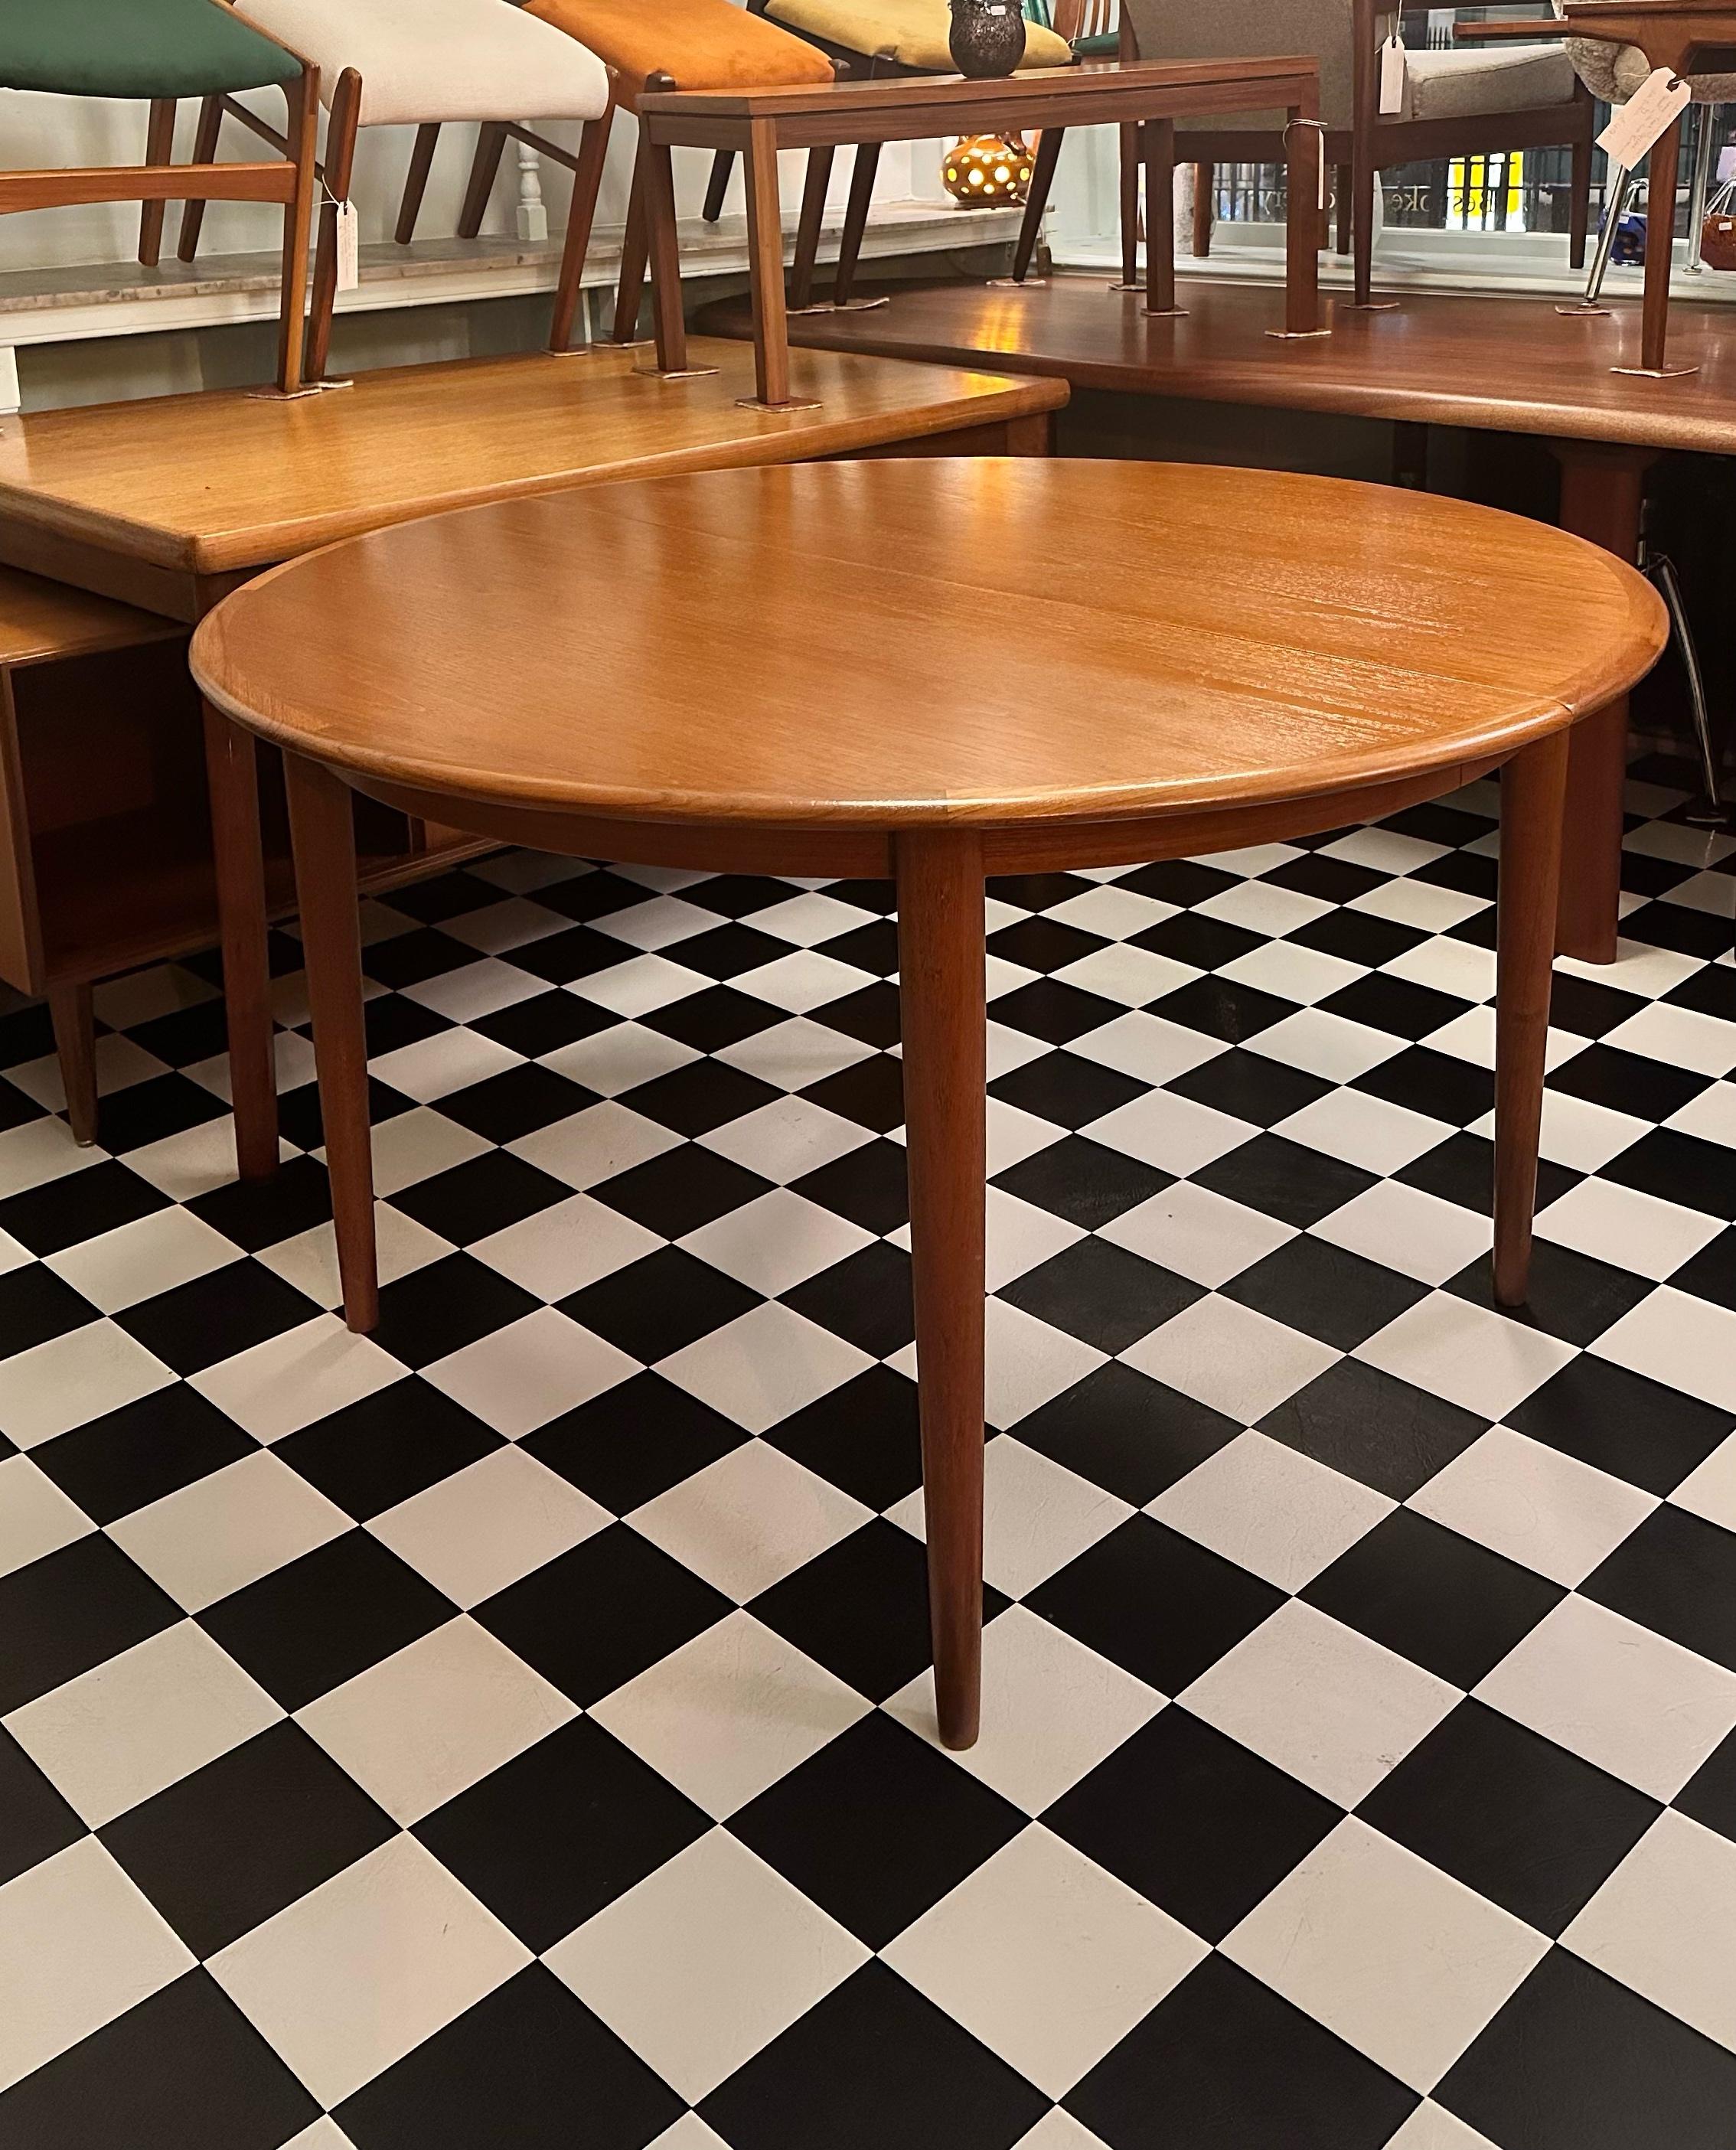 We’re happy to provide our own competitive shipping quotes with trusted couriers. Please message us with your postcode for a more accurate price. Thank you.

Beautiful mid-century modern Danish teak round extendable dining table. Designed in 1960's